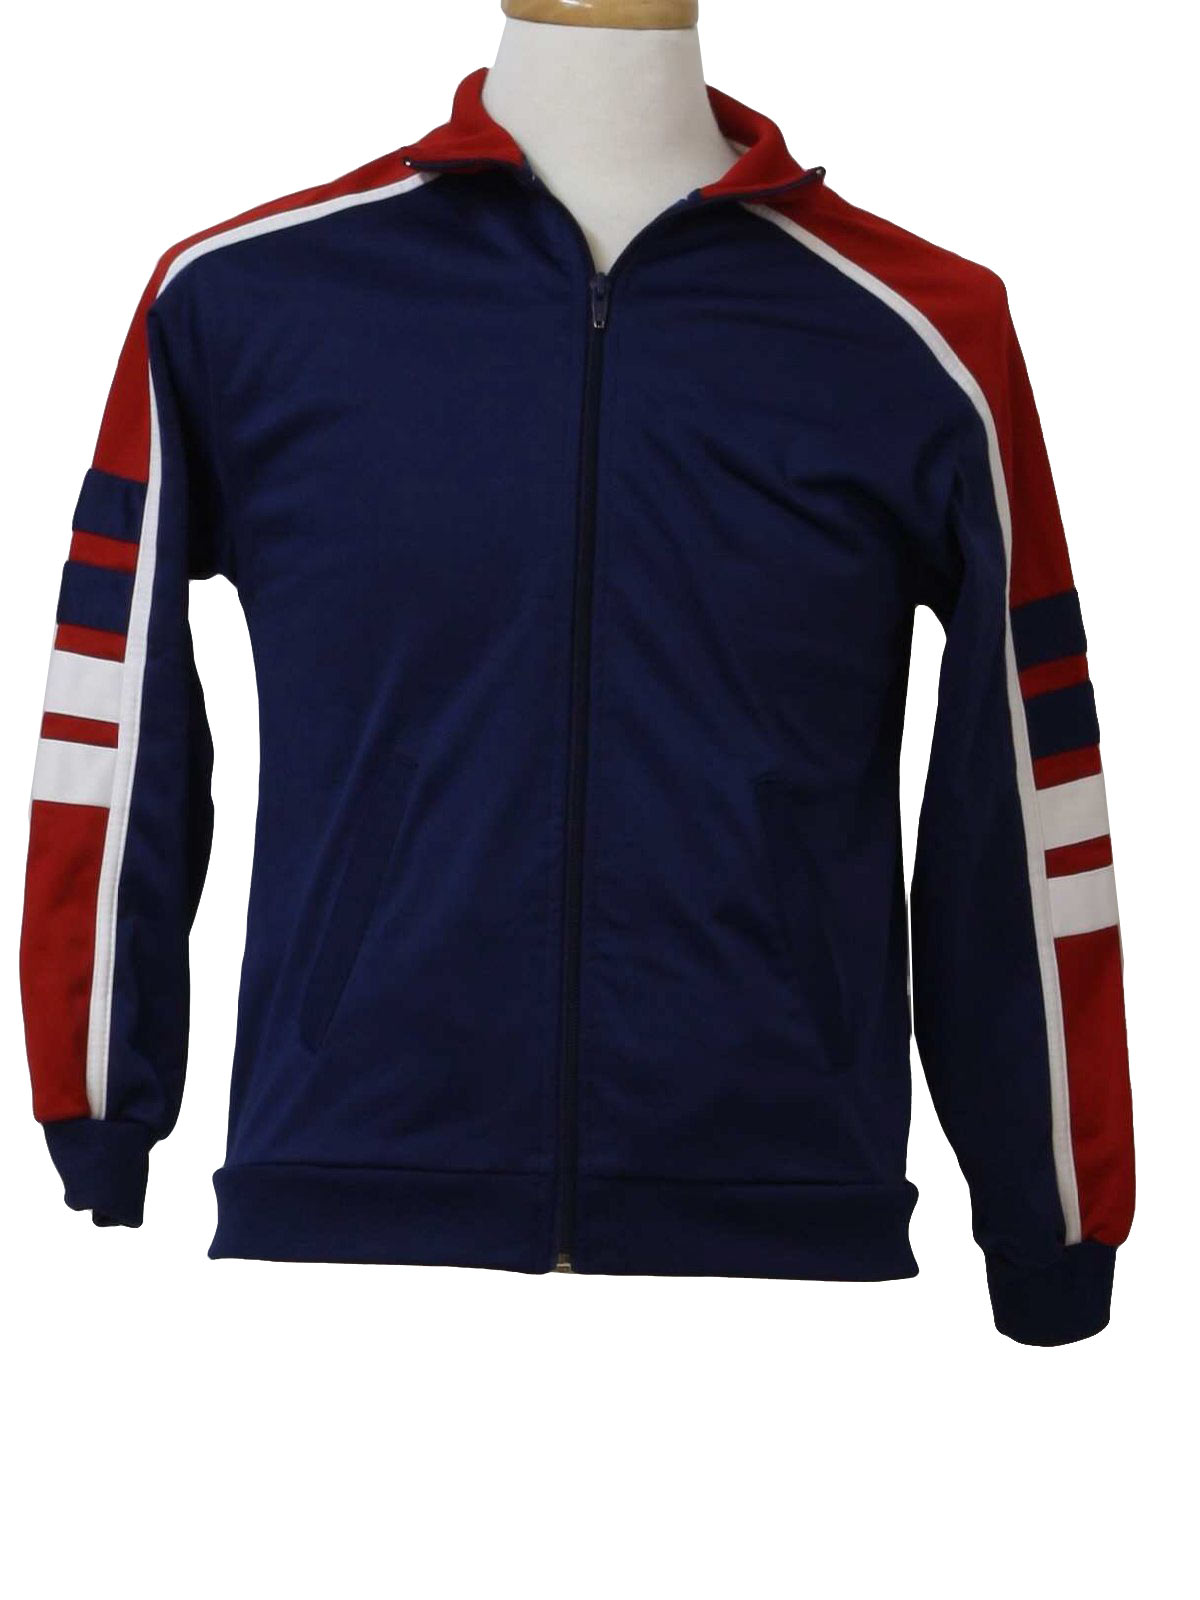 Retro 1990s Jacket: 90s -Athletic Tech- Mens blue, red and white stripe ...